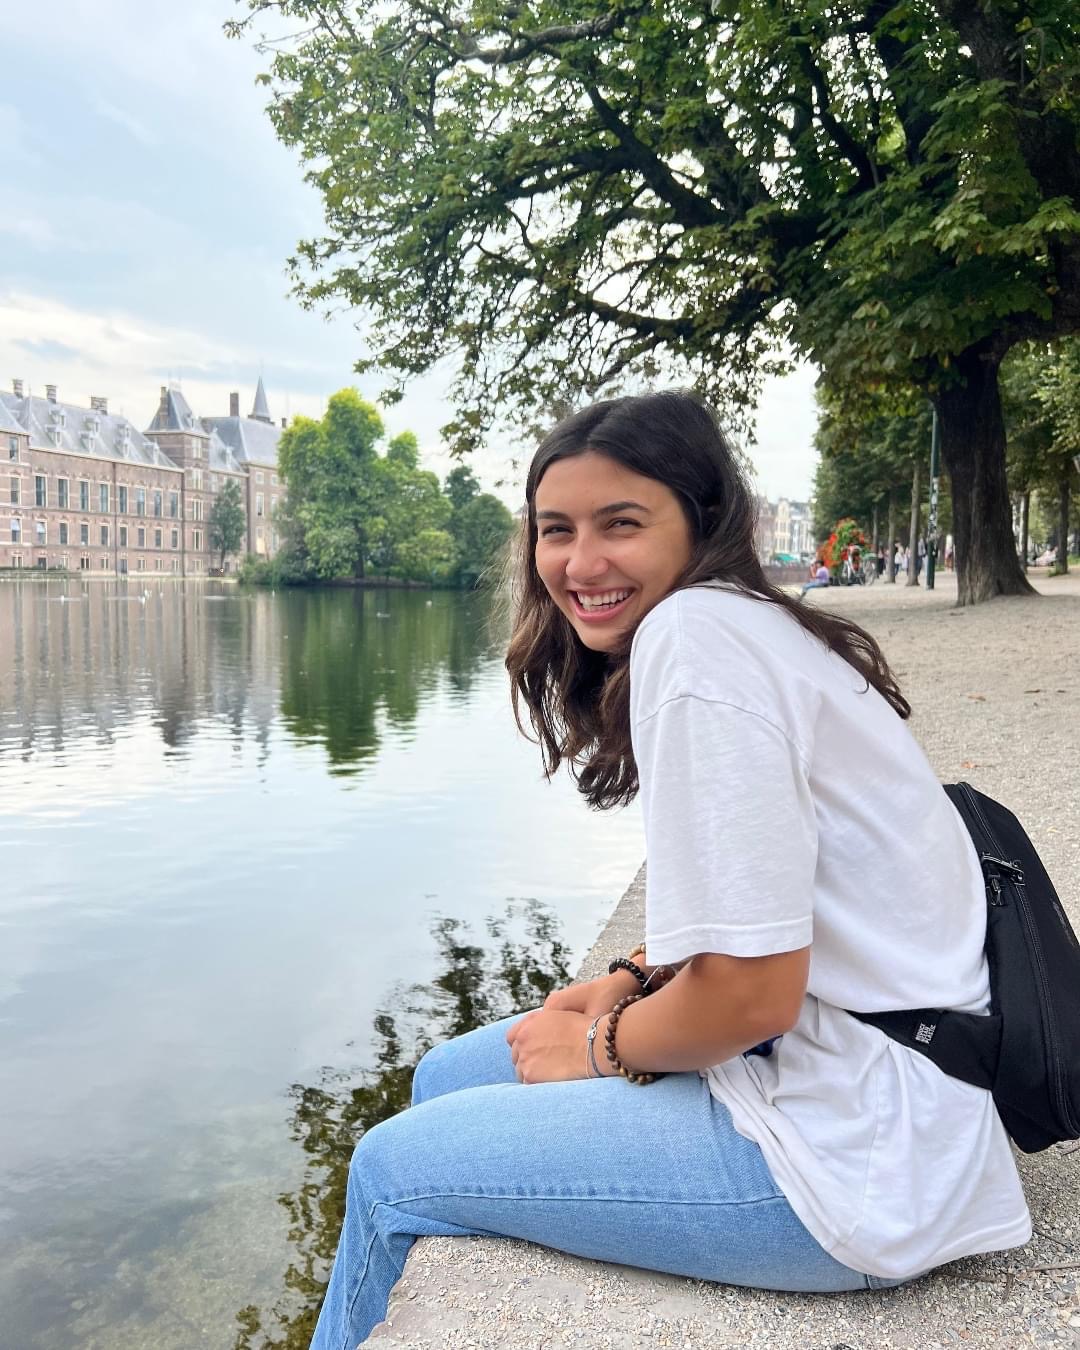 A student studying abroad in Europe